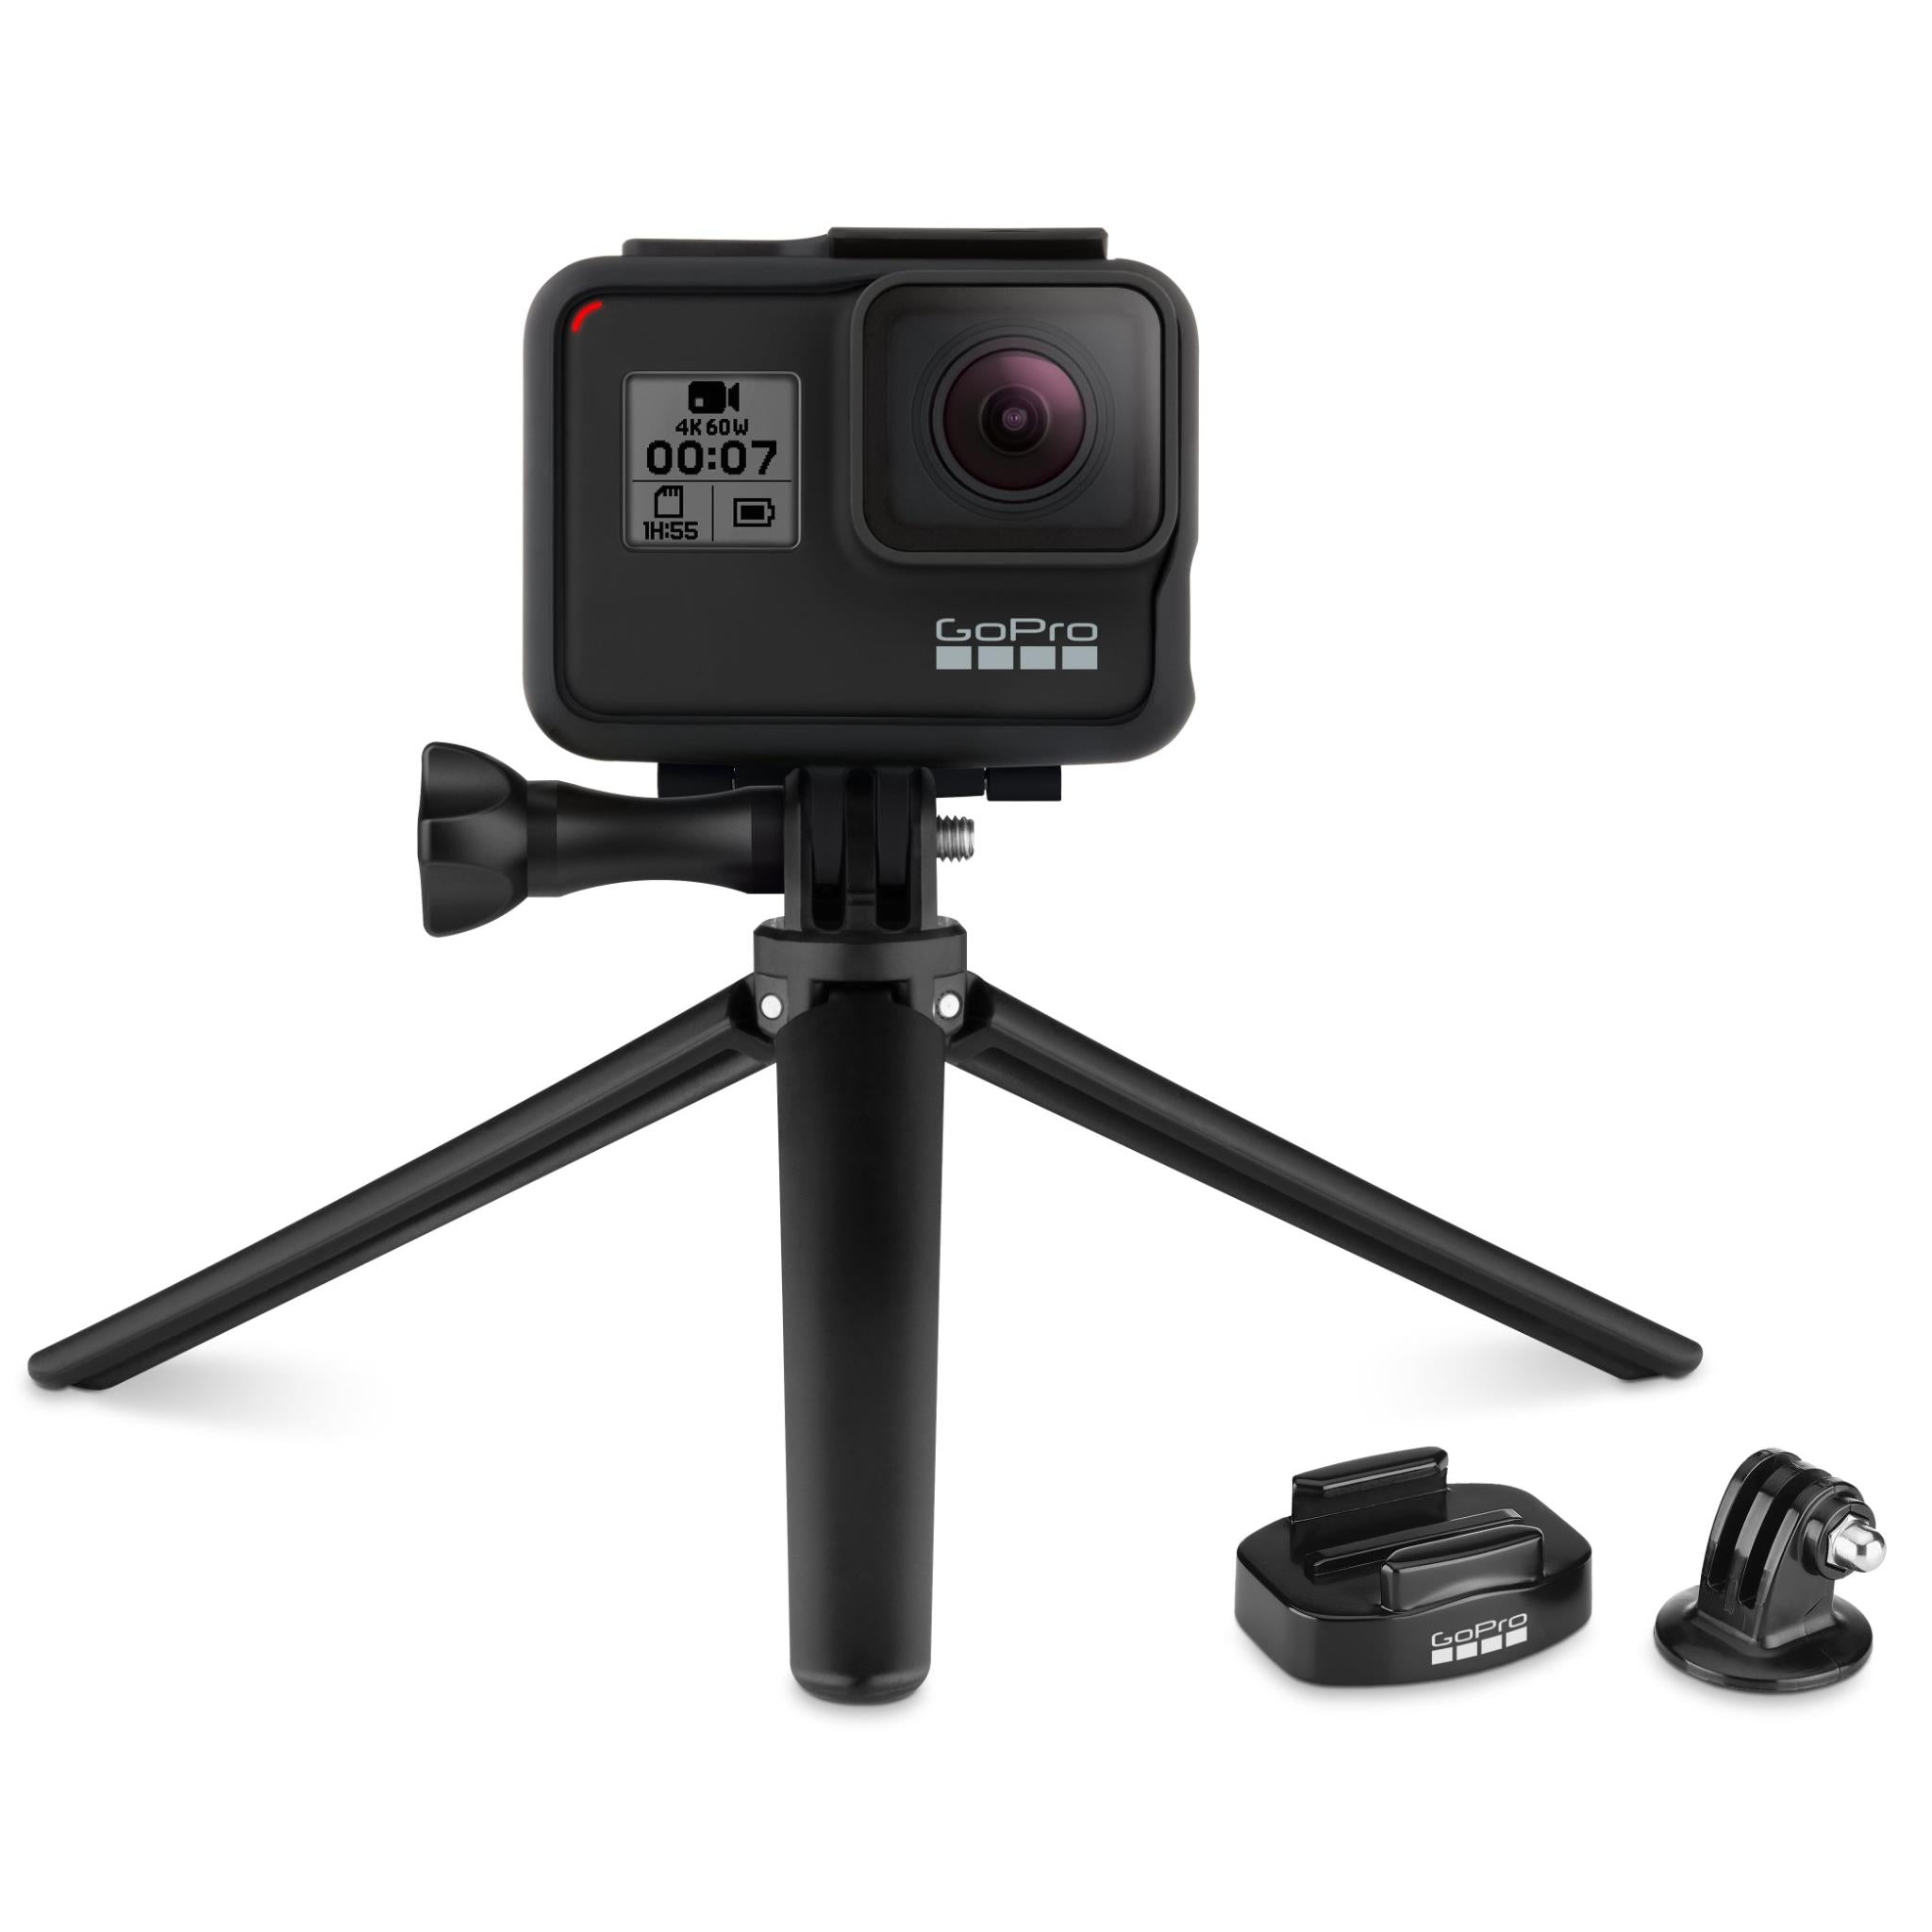 9 Ways a GoPro Tripod Will Get You Better Travel Memories